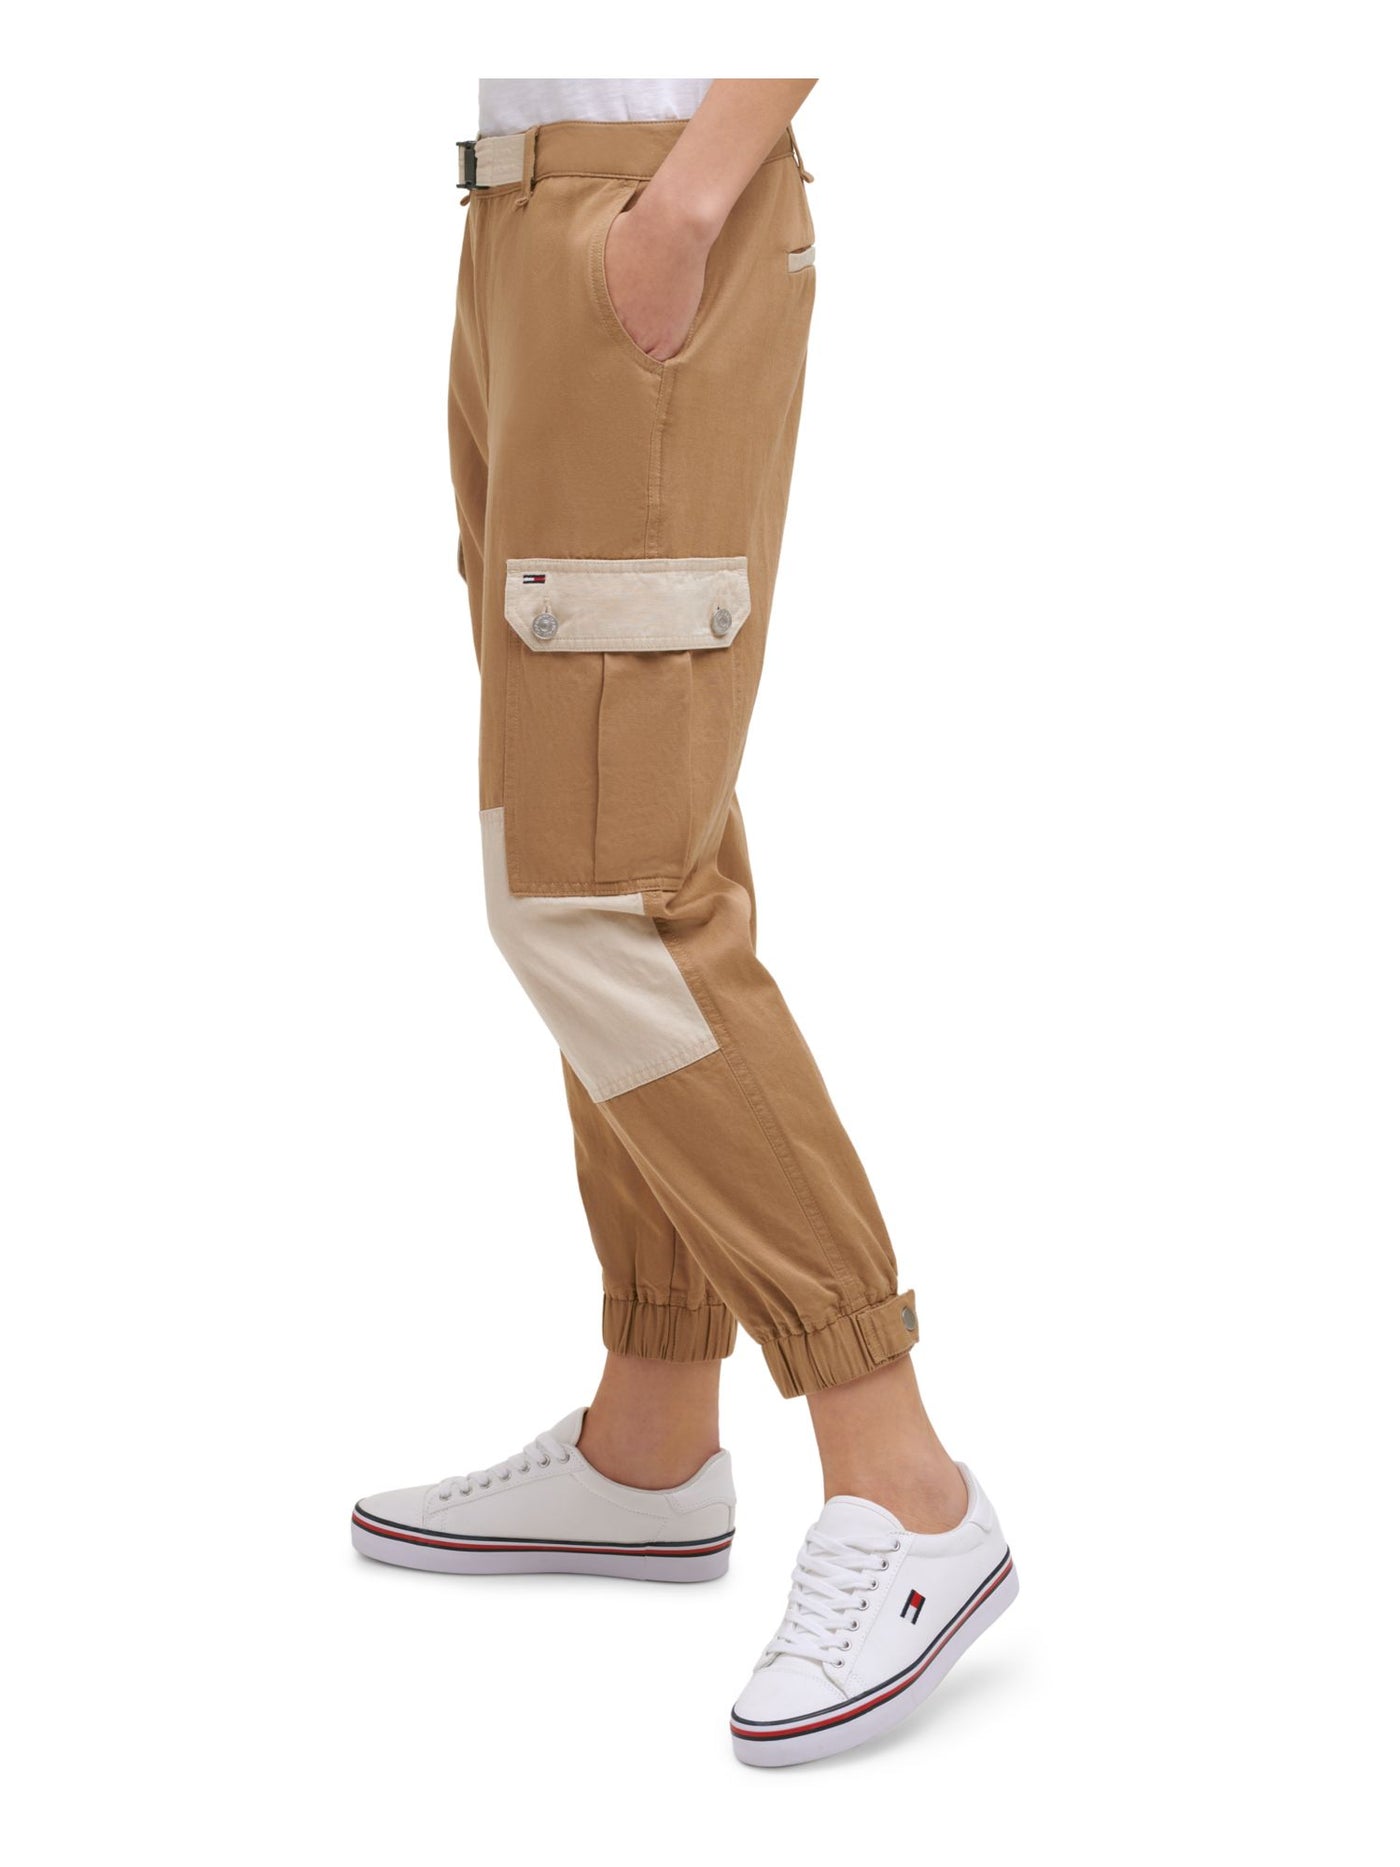 TOMMY JEANS Womens Beige Pocketed Zippered Belted Jogger-style Cargo Pants 24